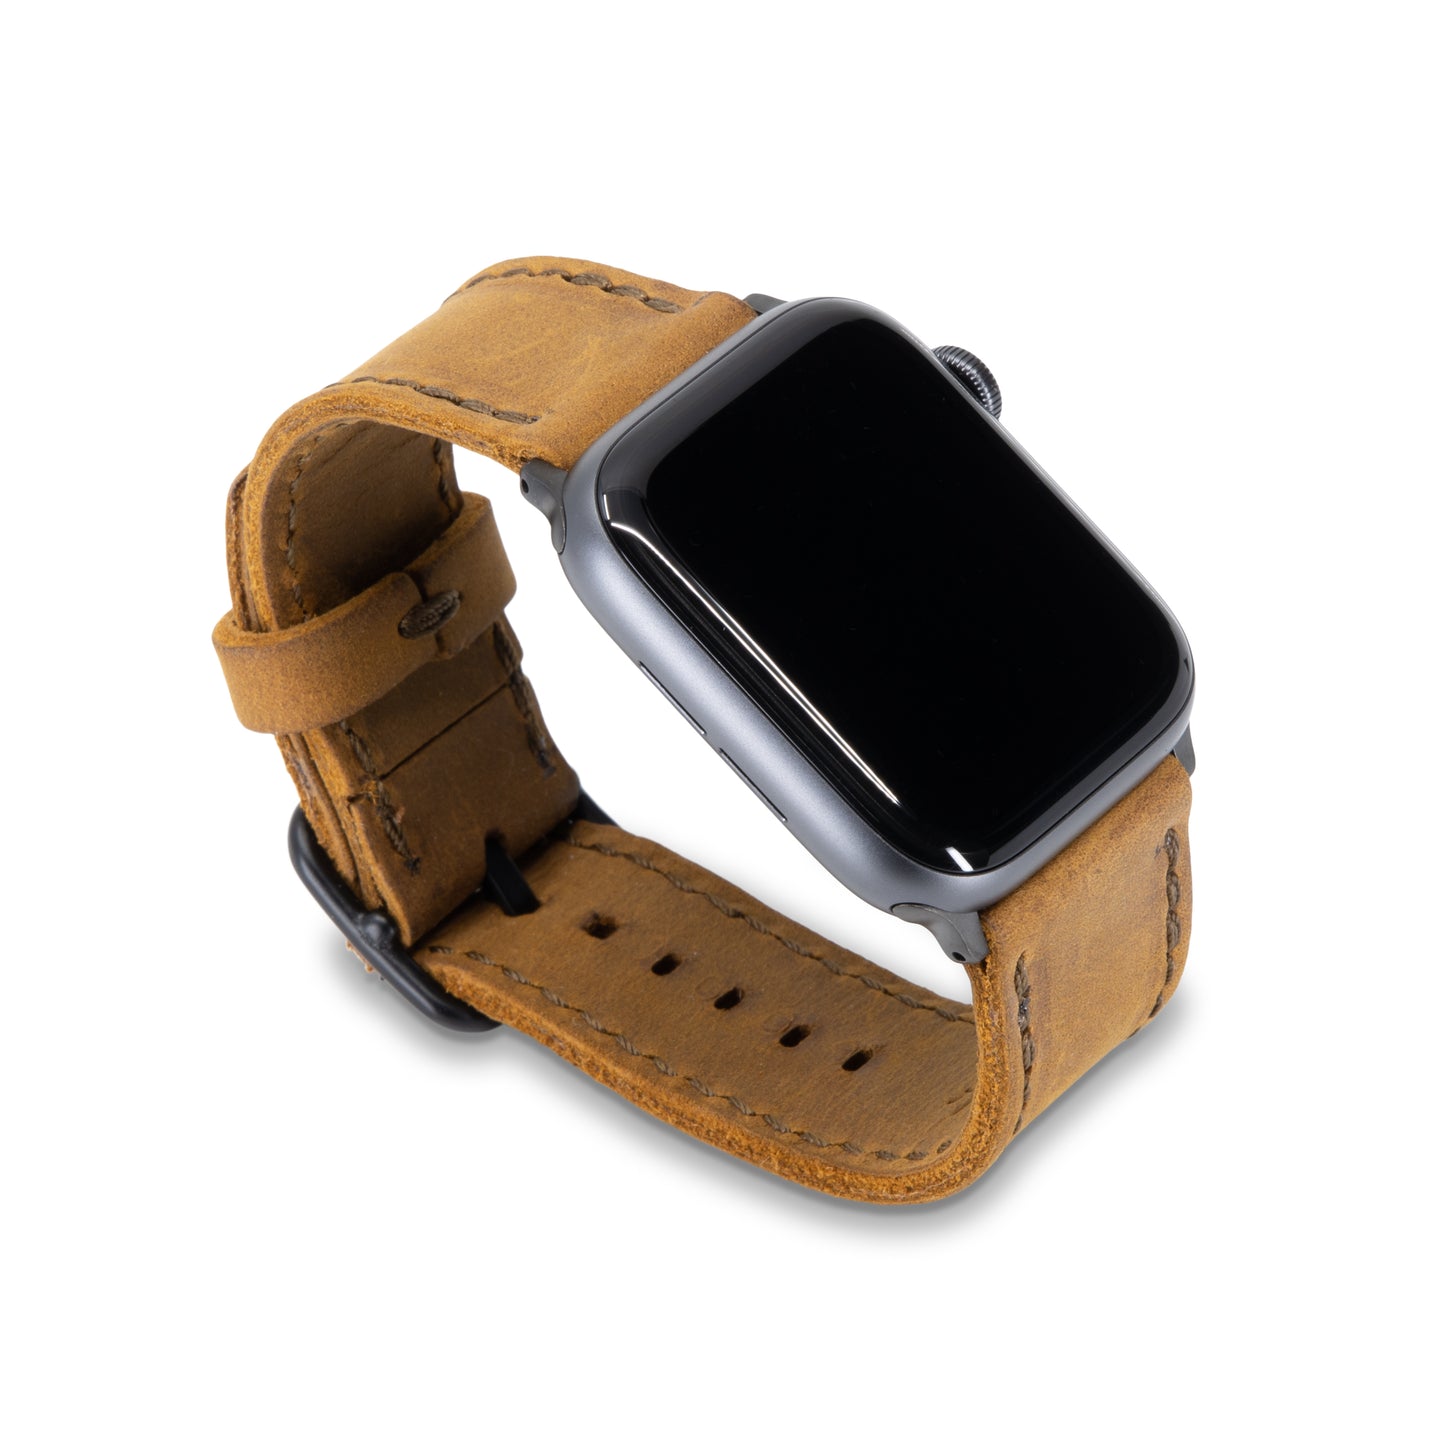 Homepage  Leather watch bands, Apple watch bands leather, Apple